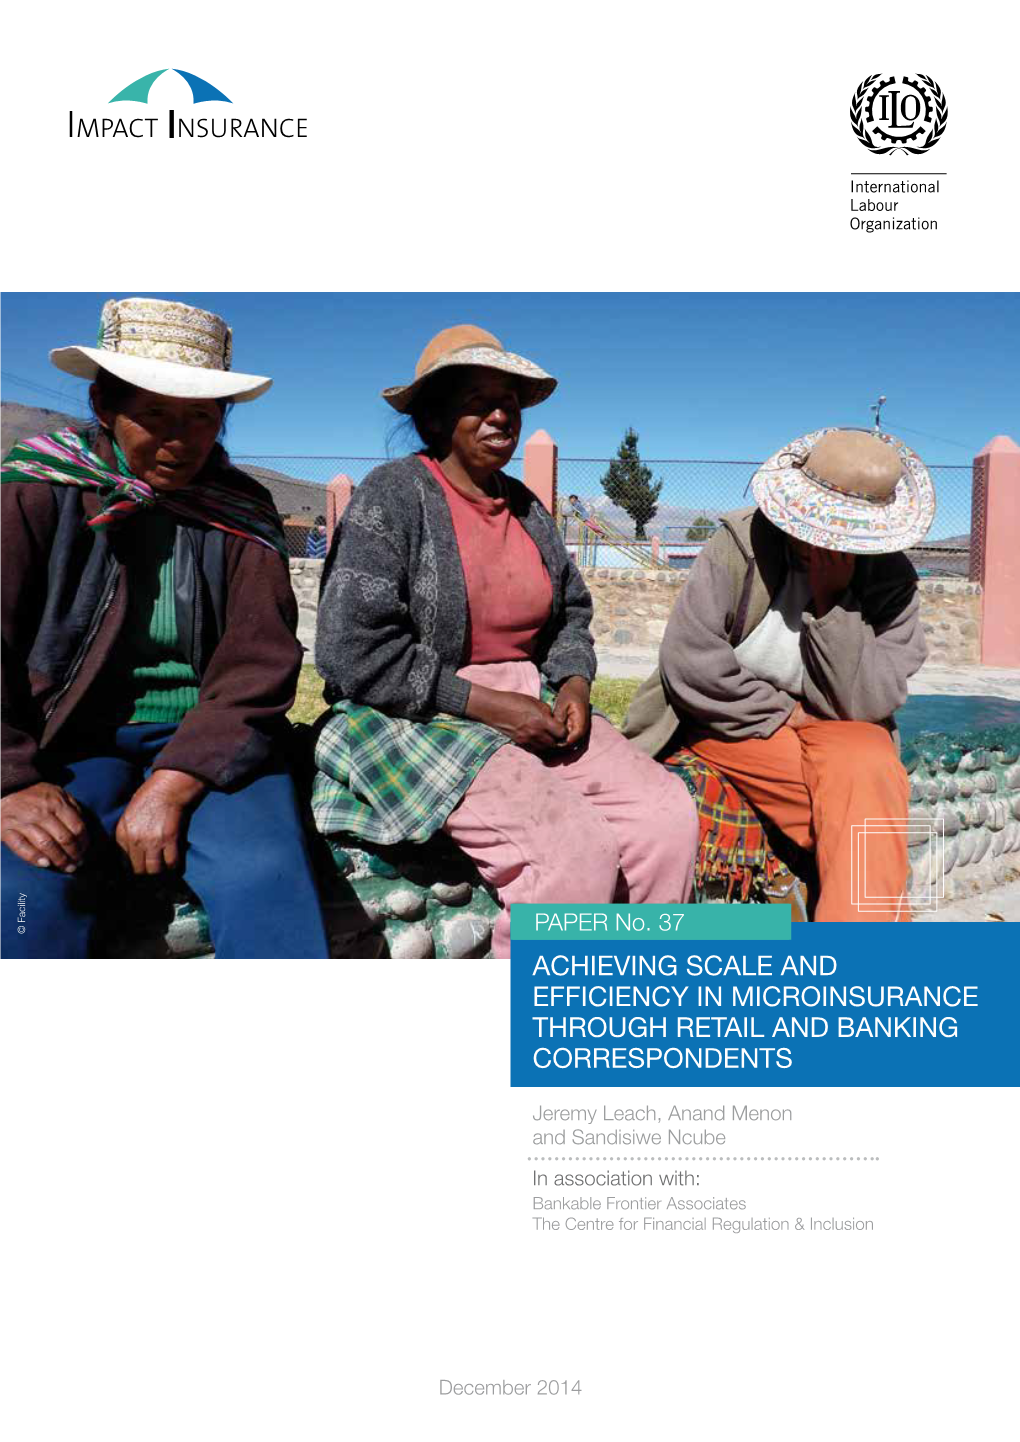 Achieving Scale and Efficiency in Microinsurance Through Retail and Banking Correspondents